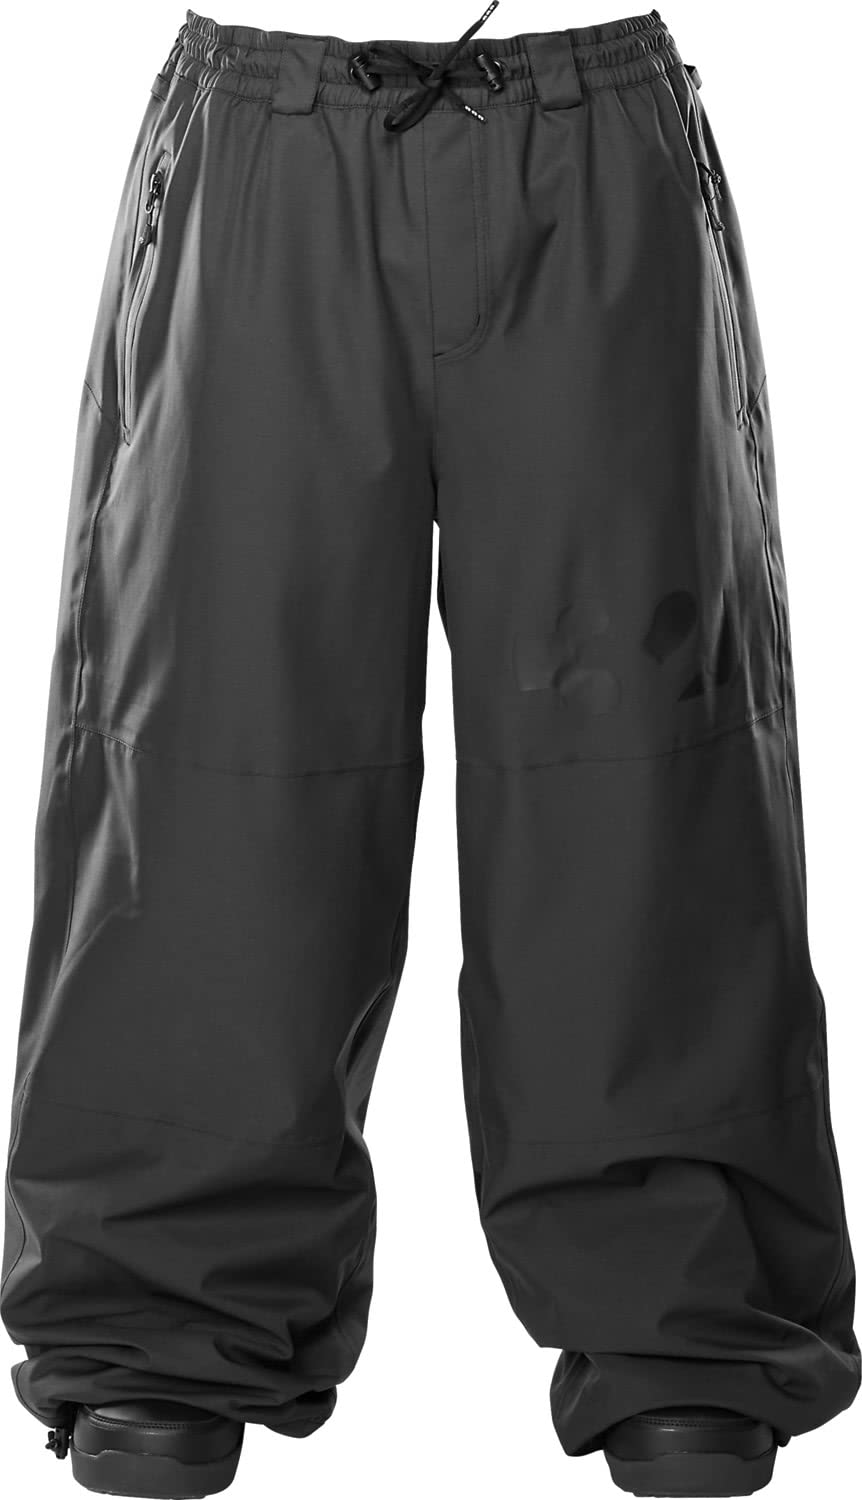 Amazon Essentials Men's Water Resistant Insulated Snow Pants Review -  YouTube